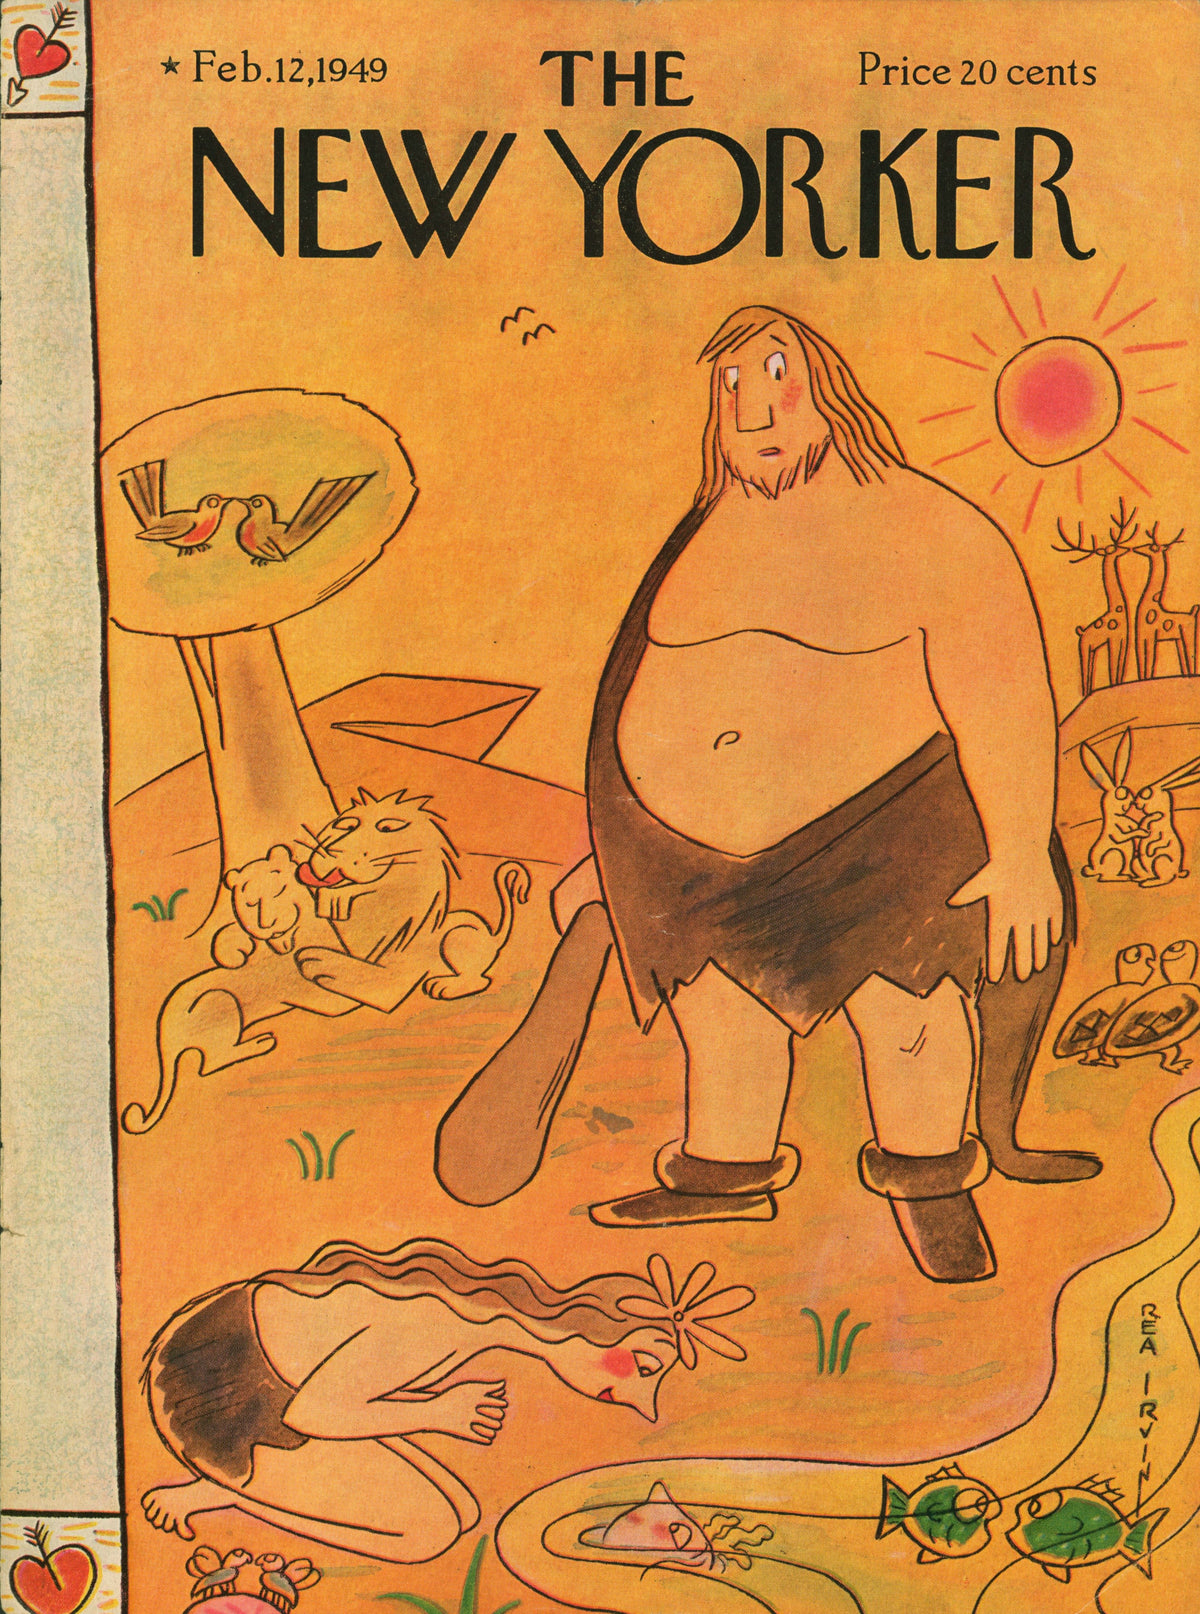 Stone Age- The New Yorker - Authentic Vintage Antique Print